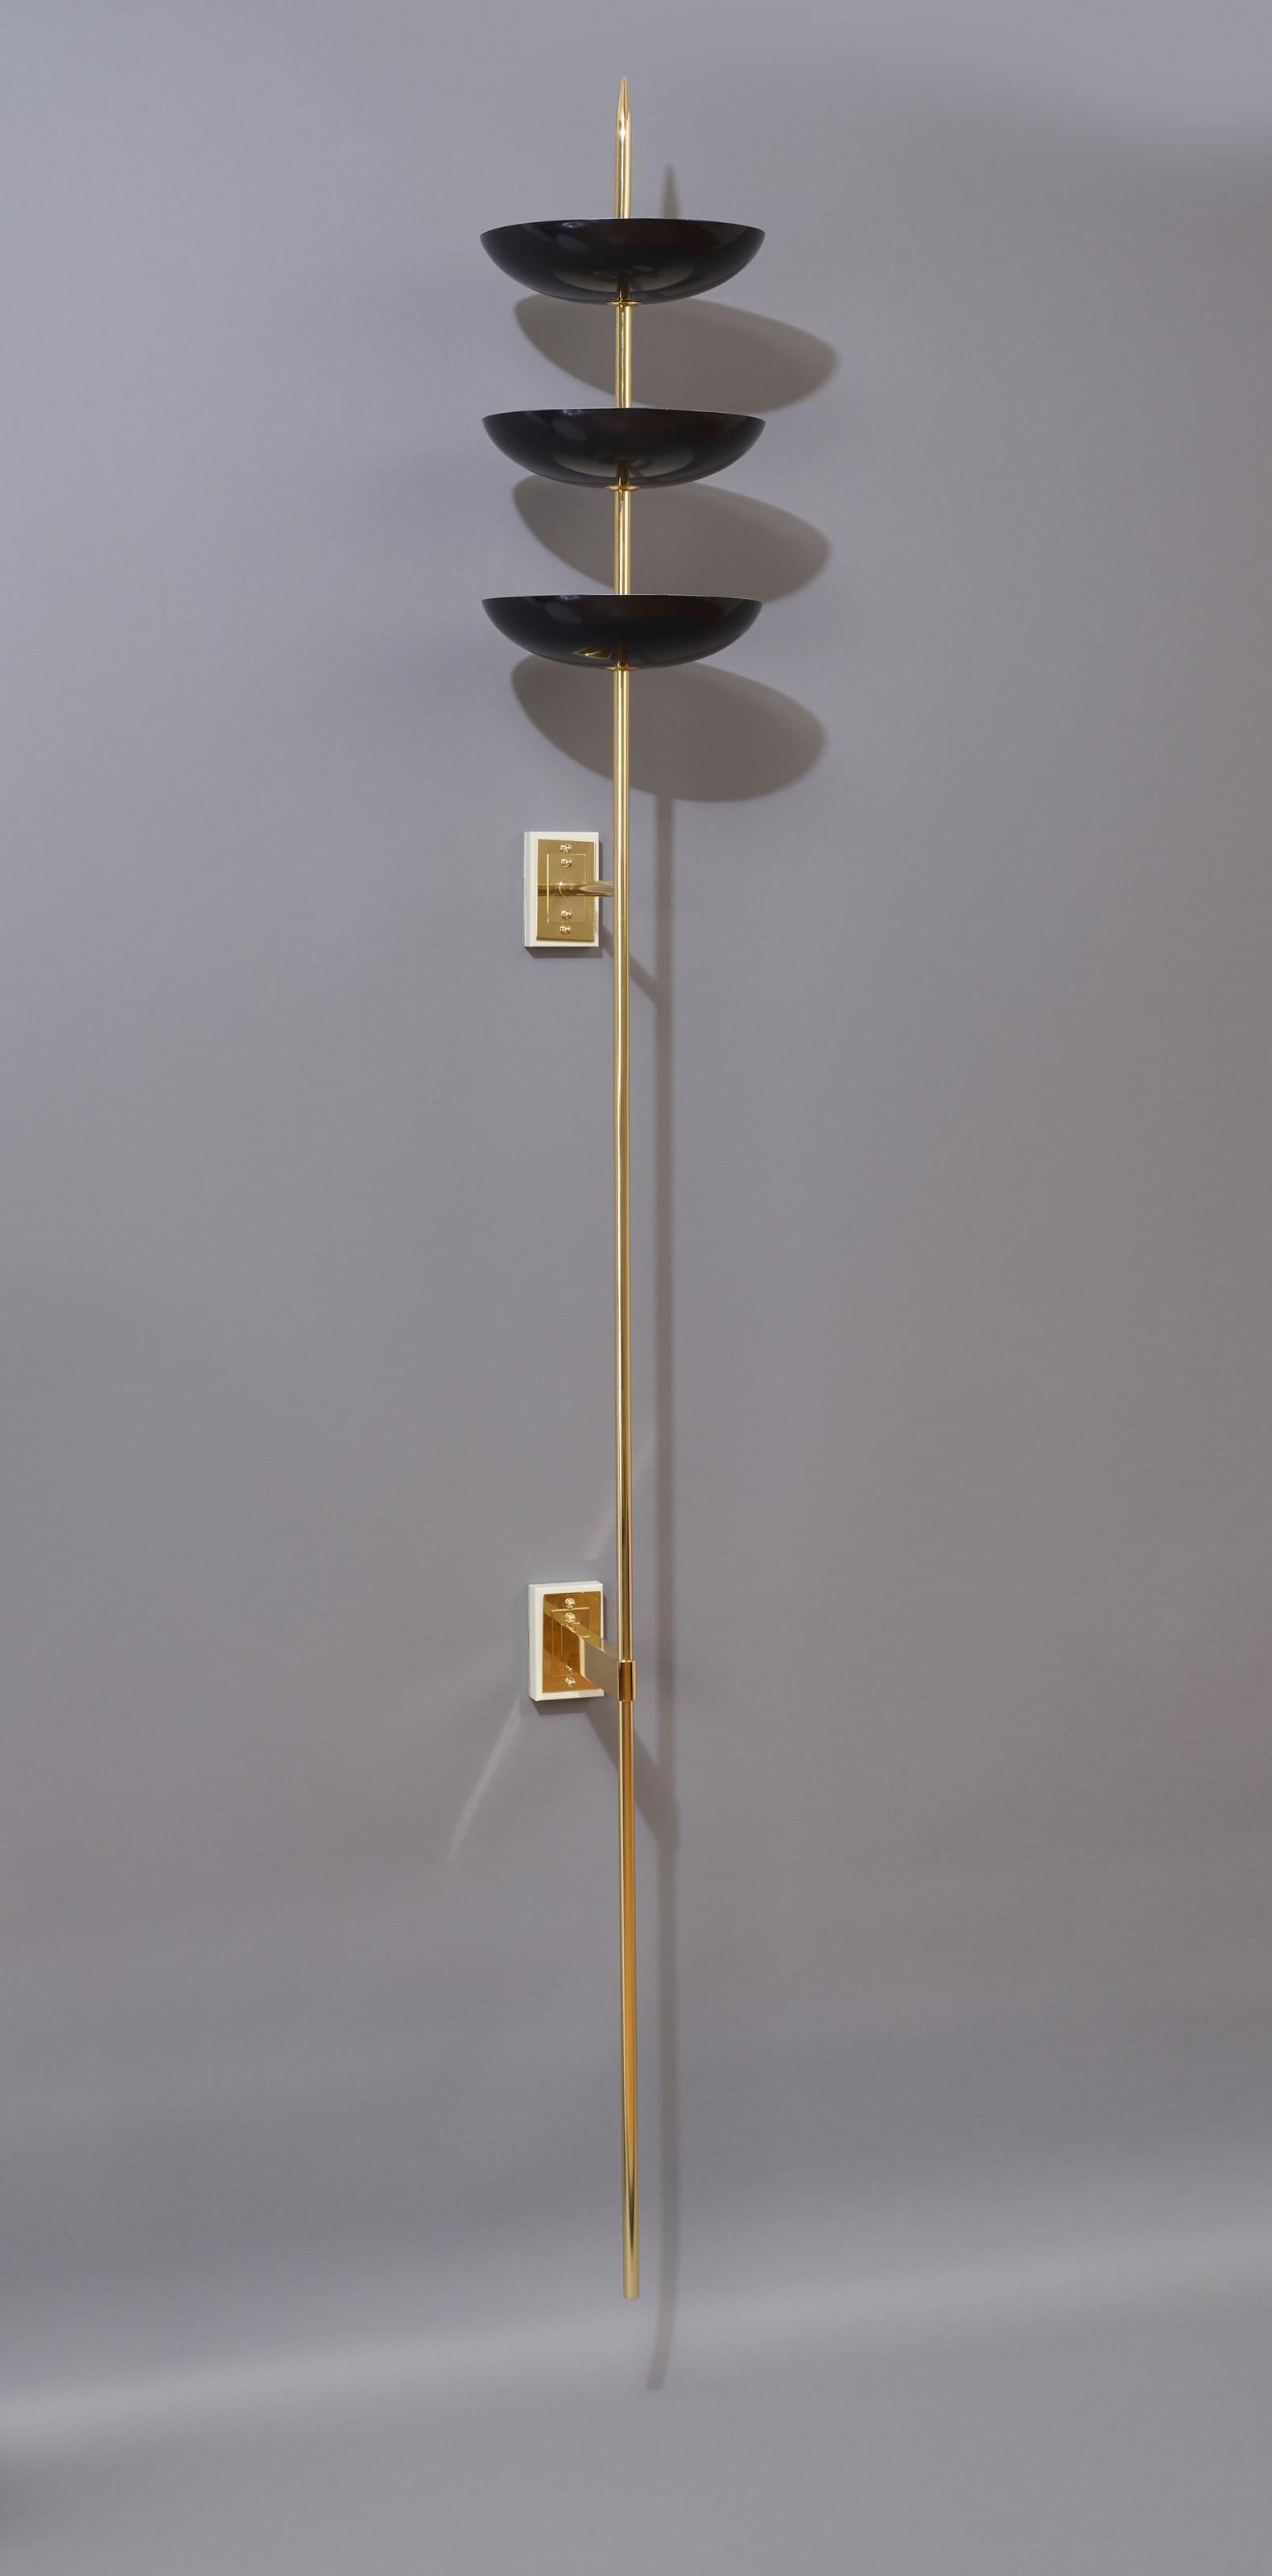 Stilnovo, Massive Pair of Three Bowl Sconces in Brass and Enamel, Italy, 1950s For Sale 4